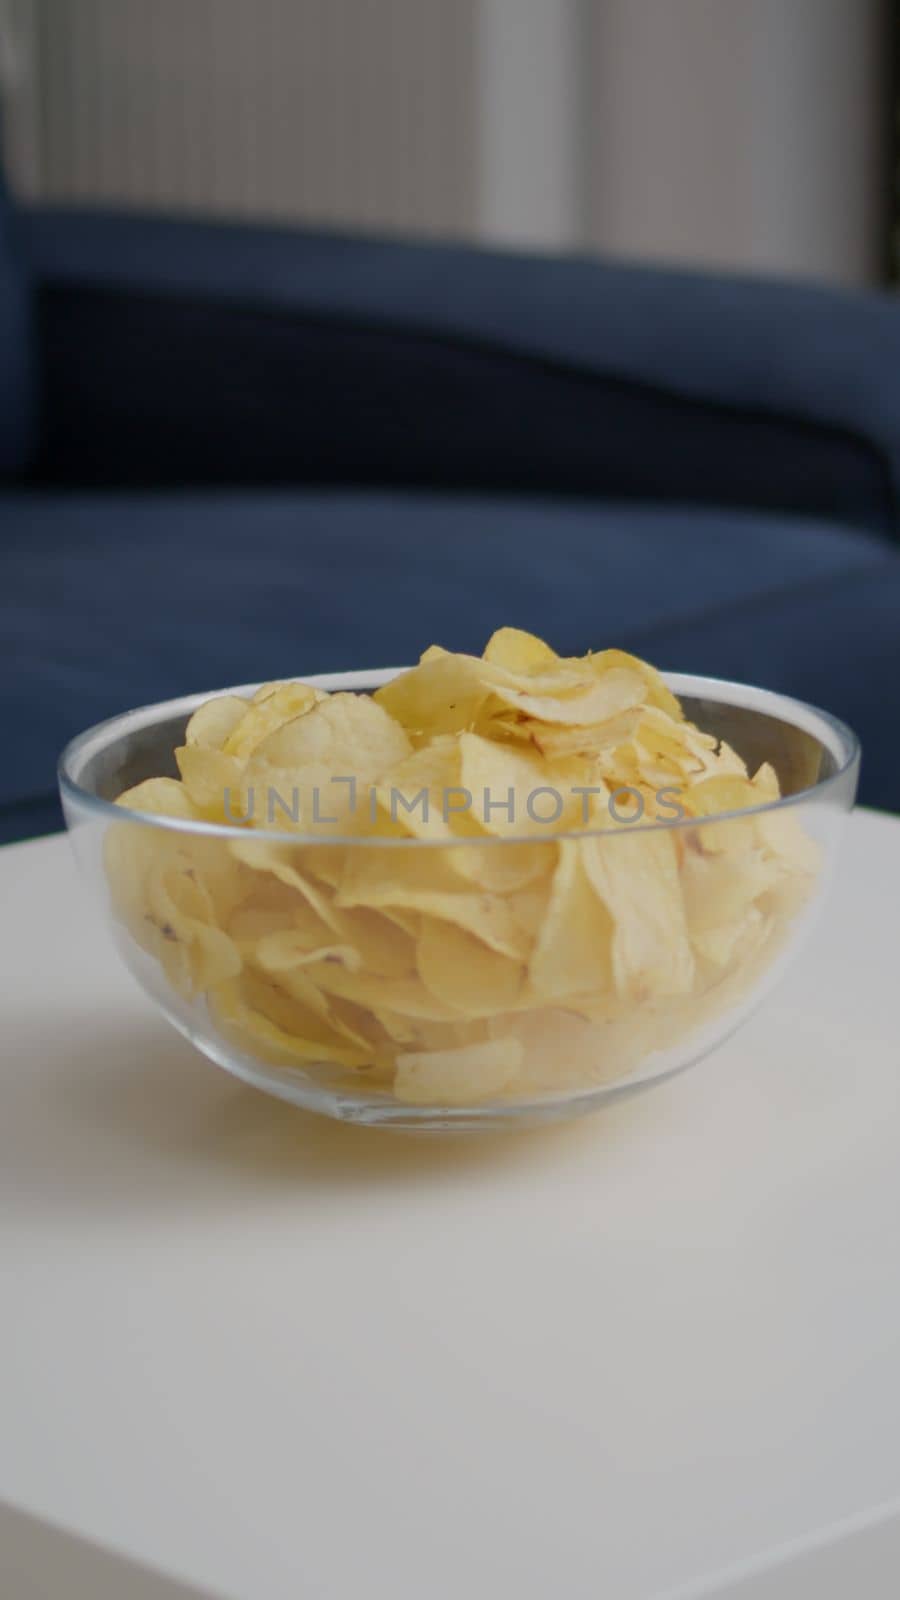 Closeup of junk fried potato bowl put on woden table in empty party room with nobody in it. Apartament is ready for friends gathering celebrating wekeend birthday party late at night